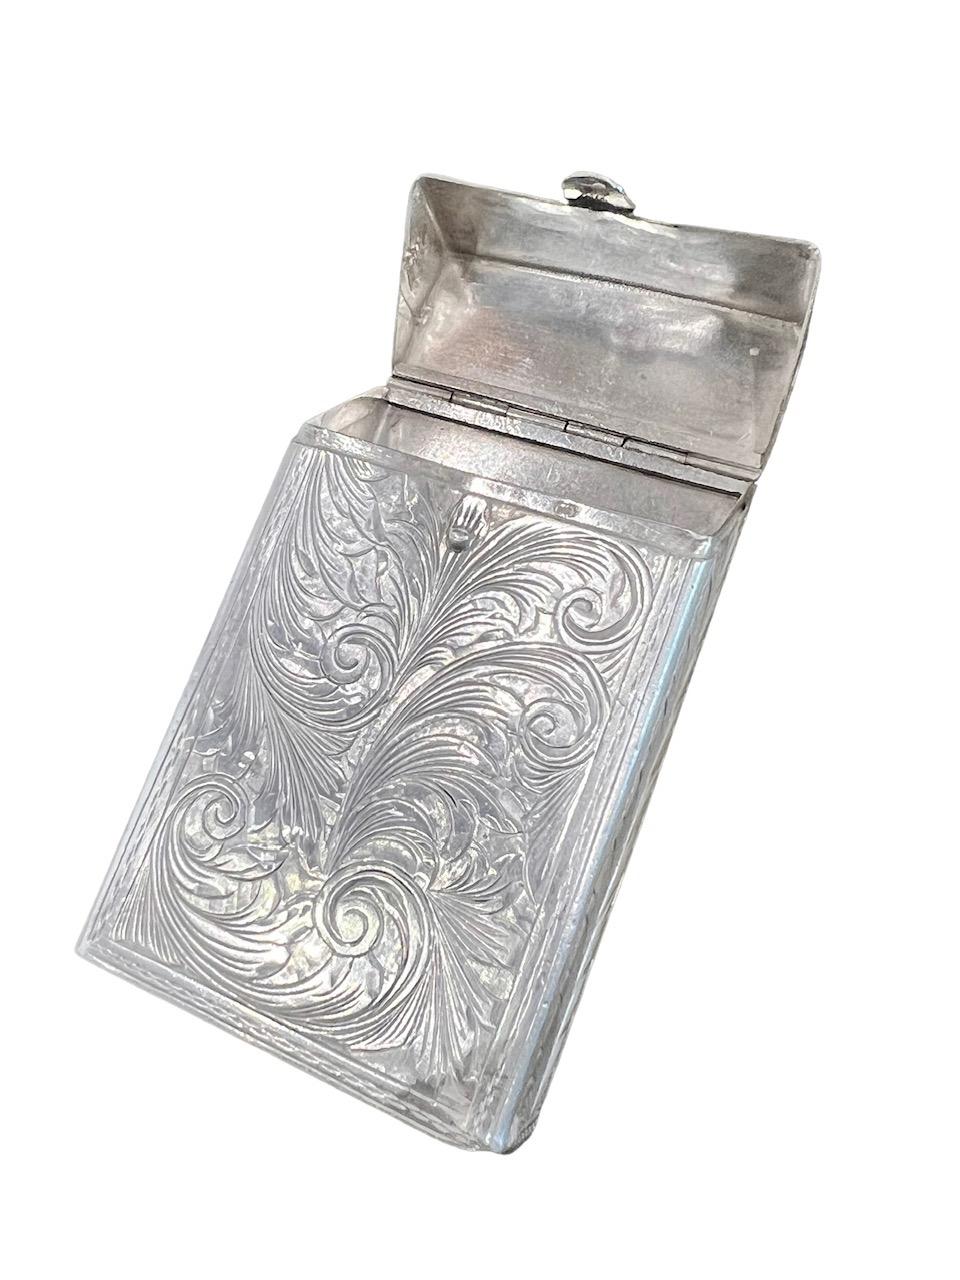 Set of two Sterling Silver Cigarette Cases 19th and 20 Century, Mario Buccellat For Sale 9